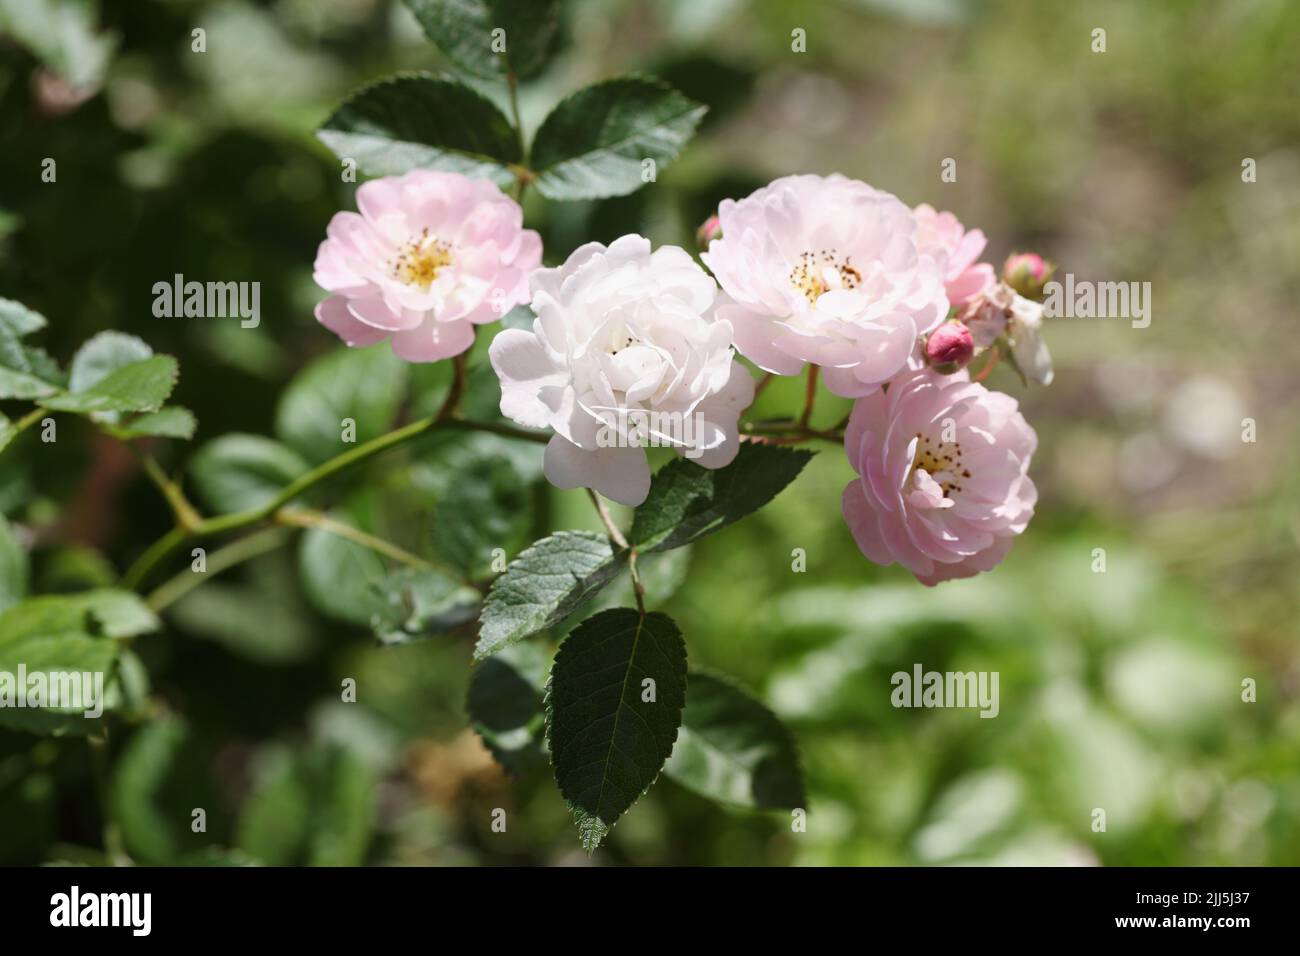 Pink rose flowers in a garden Stock Photo